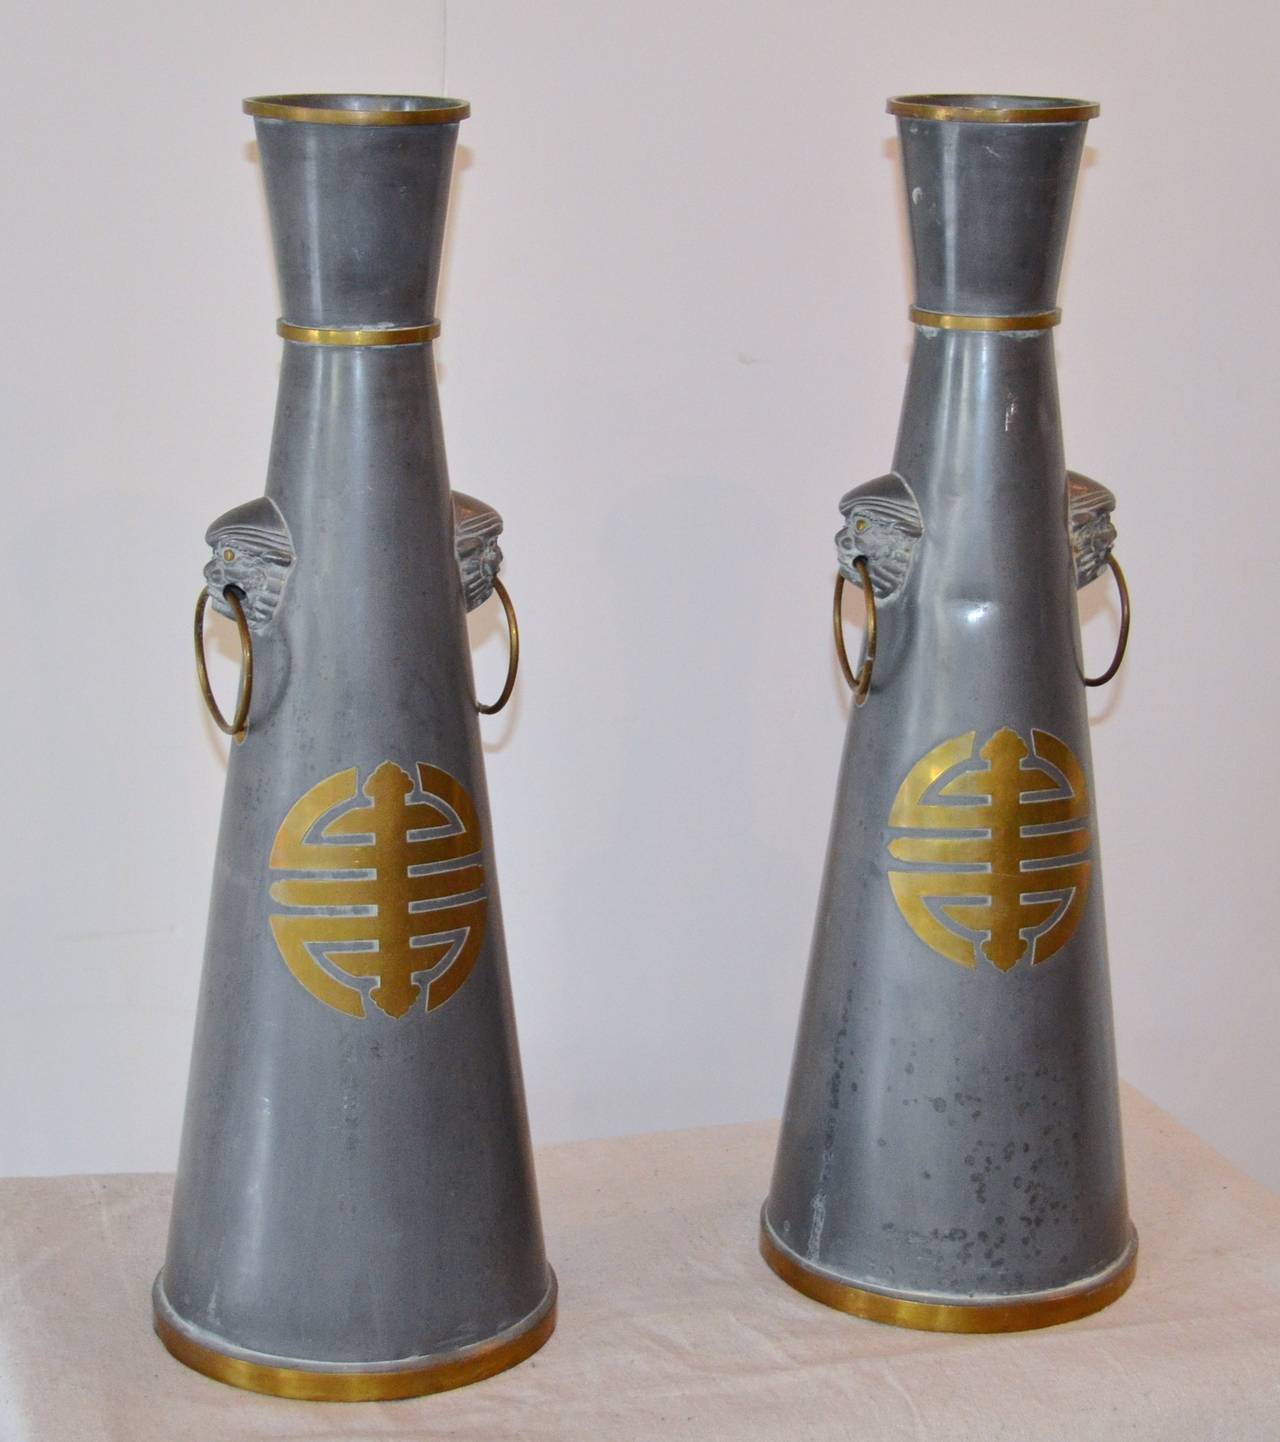 Great scale and materials on these heavy pewter and brass vases bring sophistication to any setting.